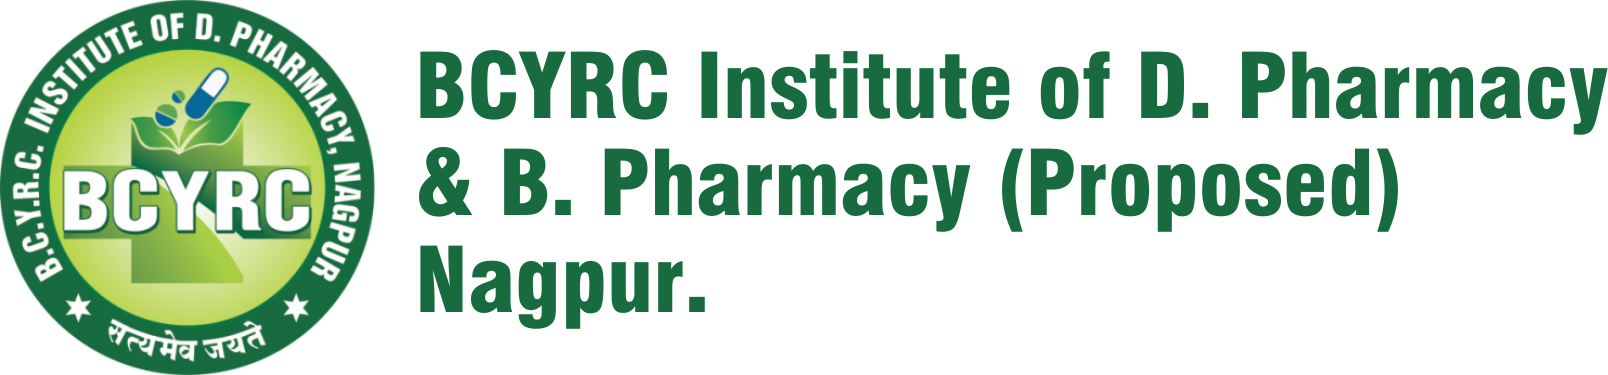 BCYRC Institute of D. Pharmacy & B. Pharmacy Proposed Nagpur